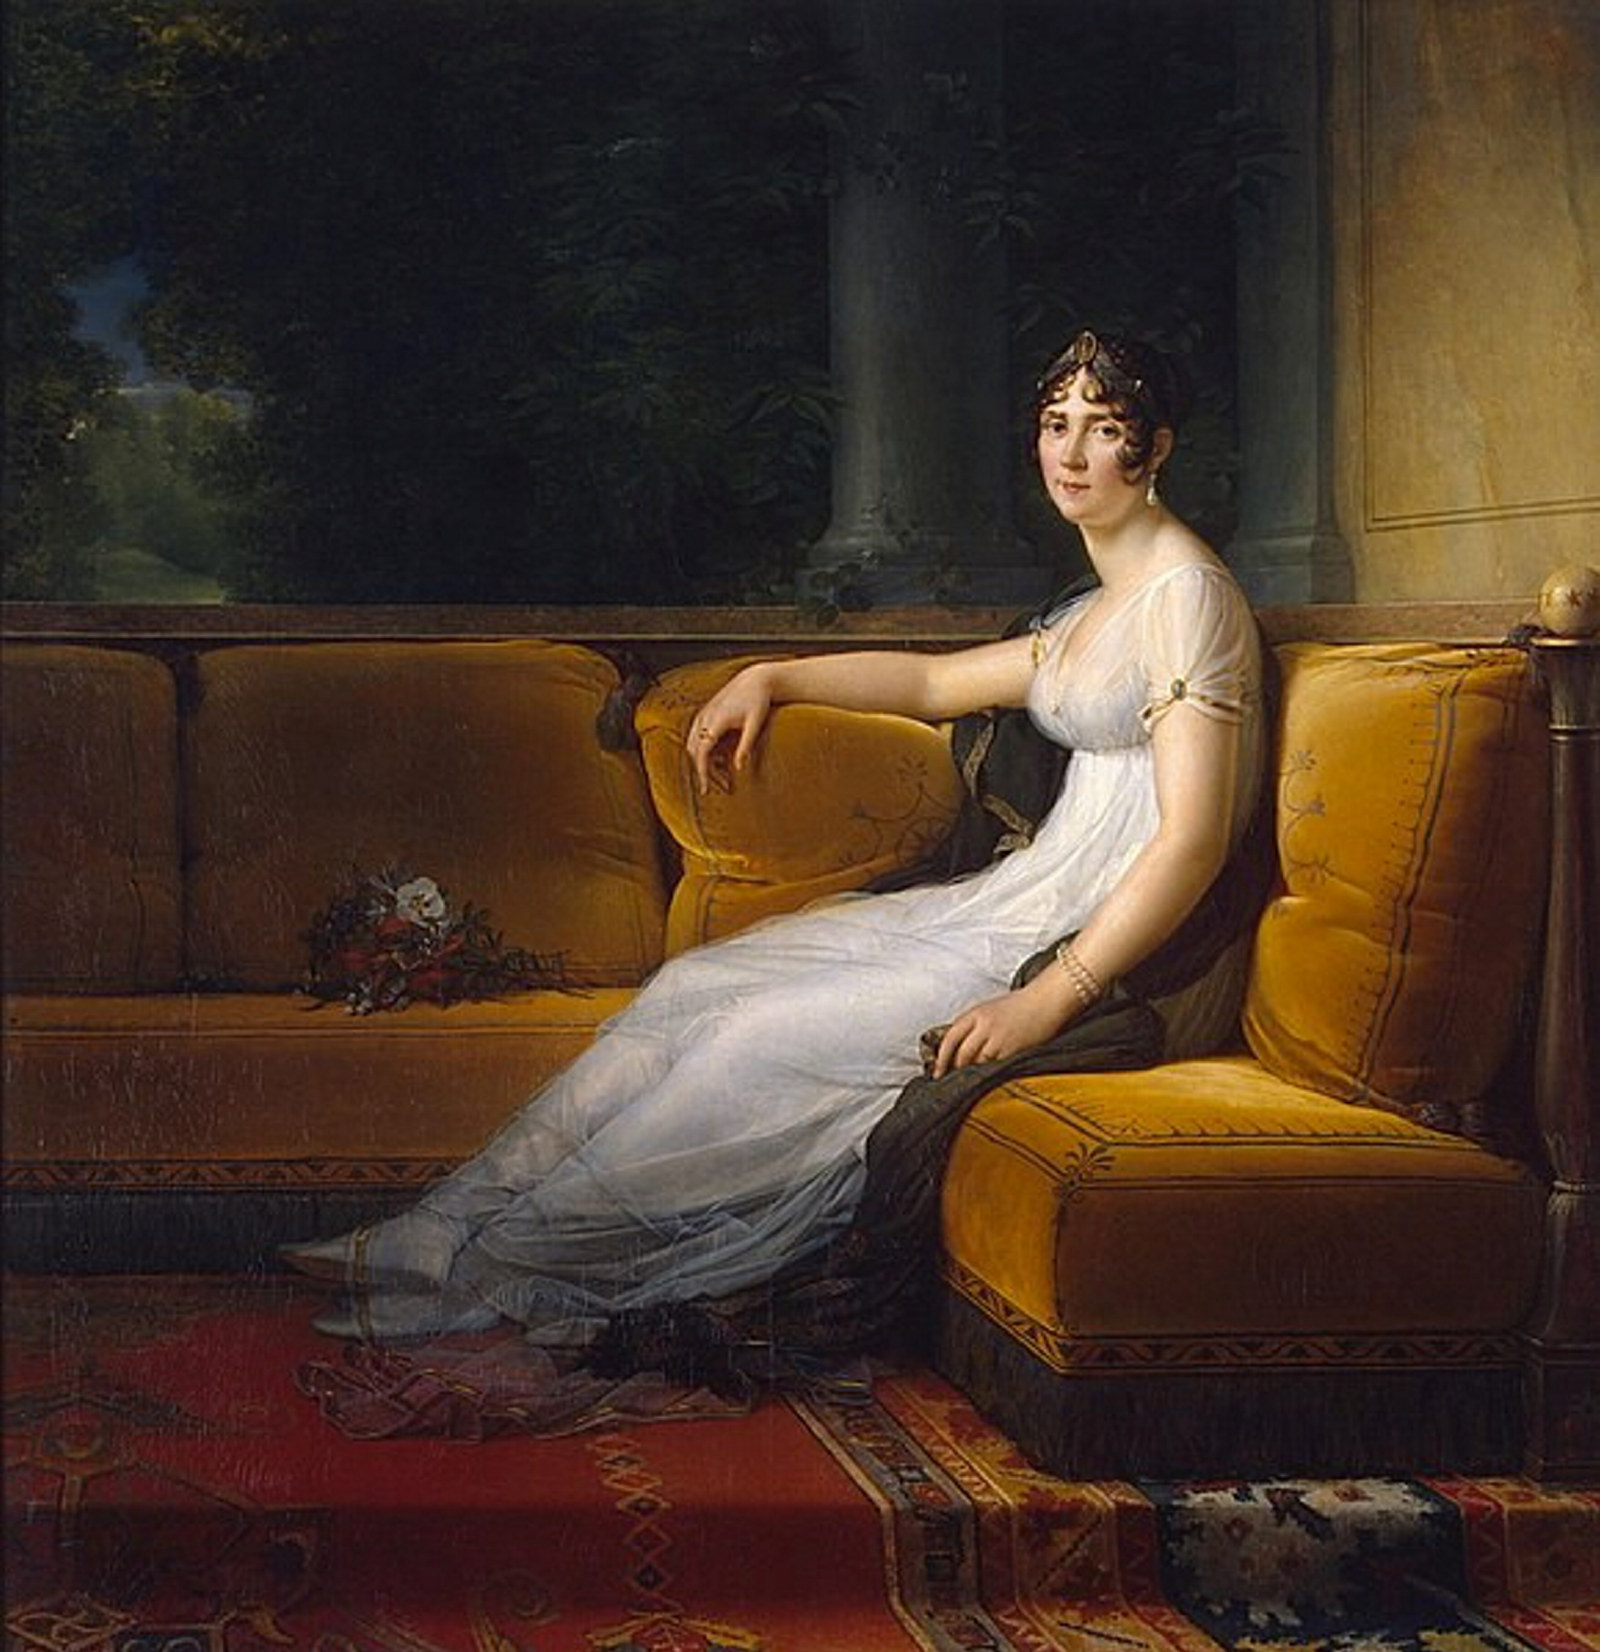 portrait of Portrait of Josephine de Beauharnais (Empress Josephine) where she is sitting on a couch with her legs stretched out and a bunch of flowers sitting next to her.